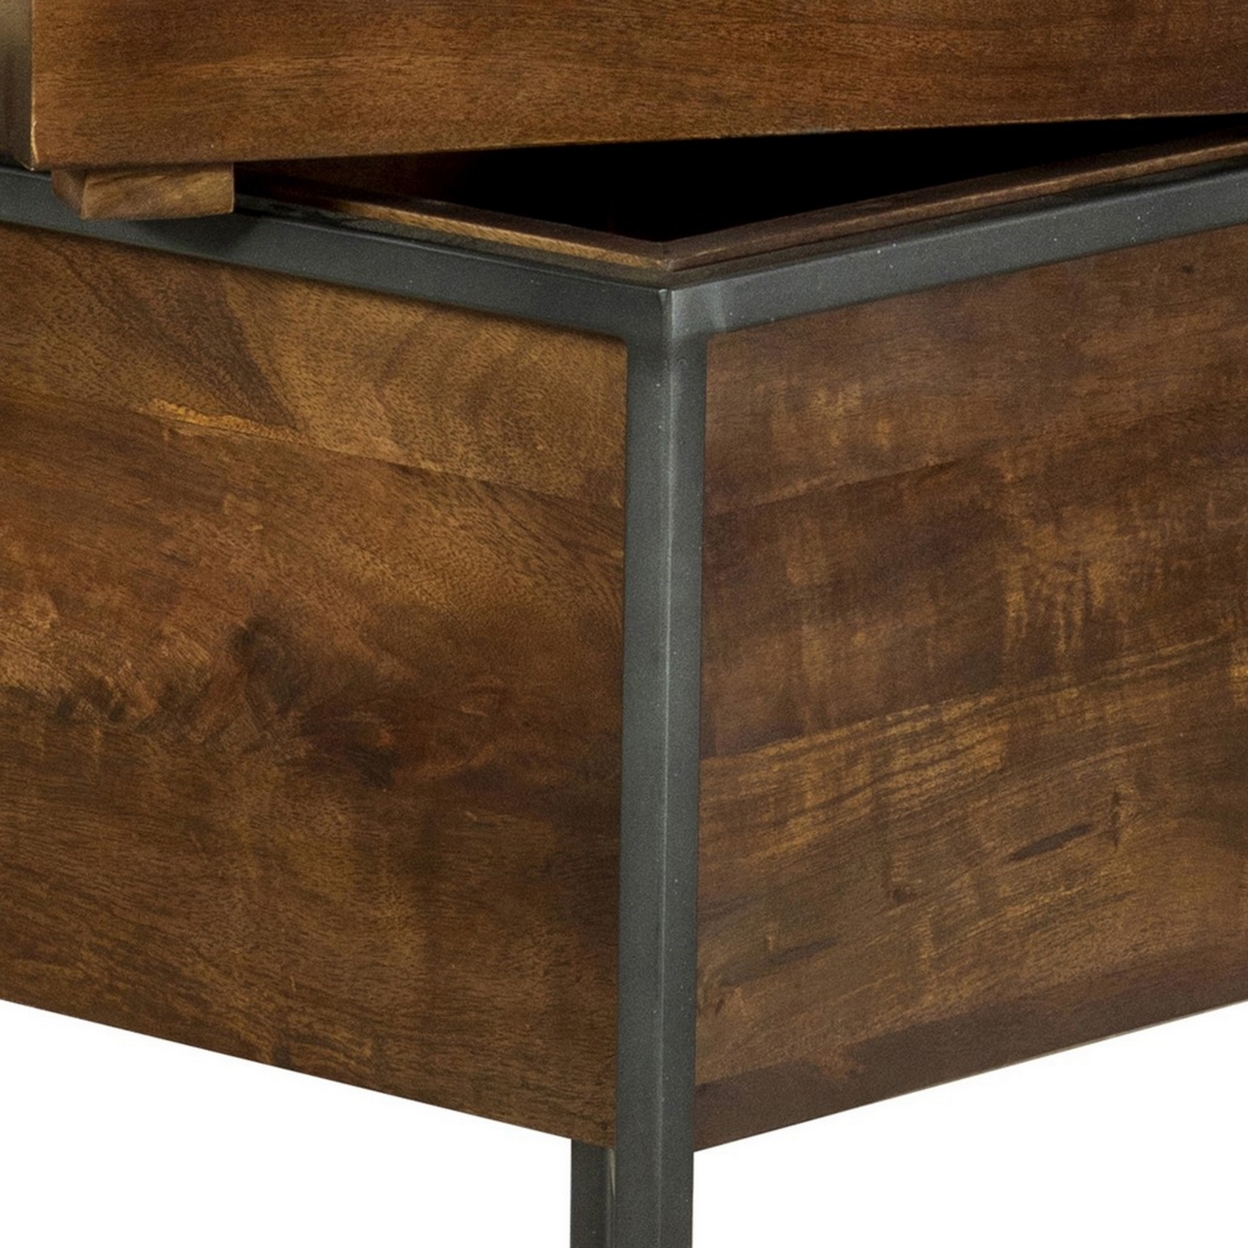 22 Inch Modern Square Accent Table, Removable Tray Top With Storage, Brown- Saltoro Sherpi